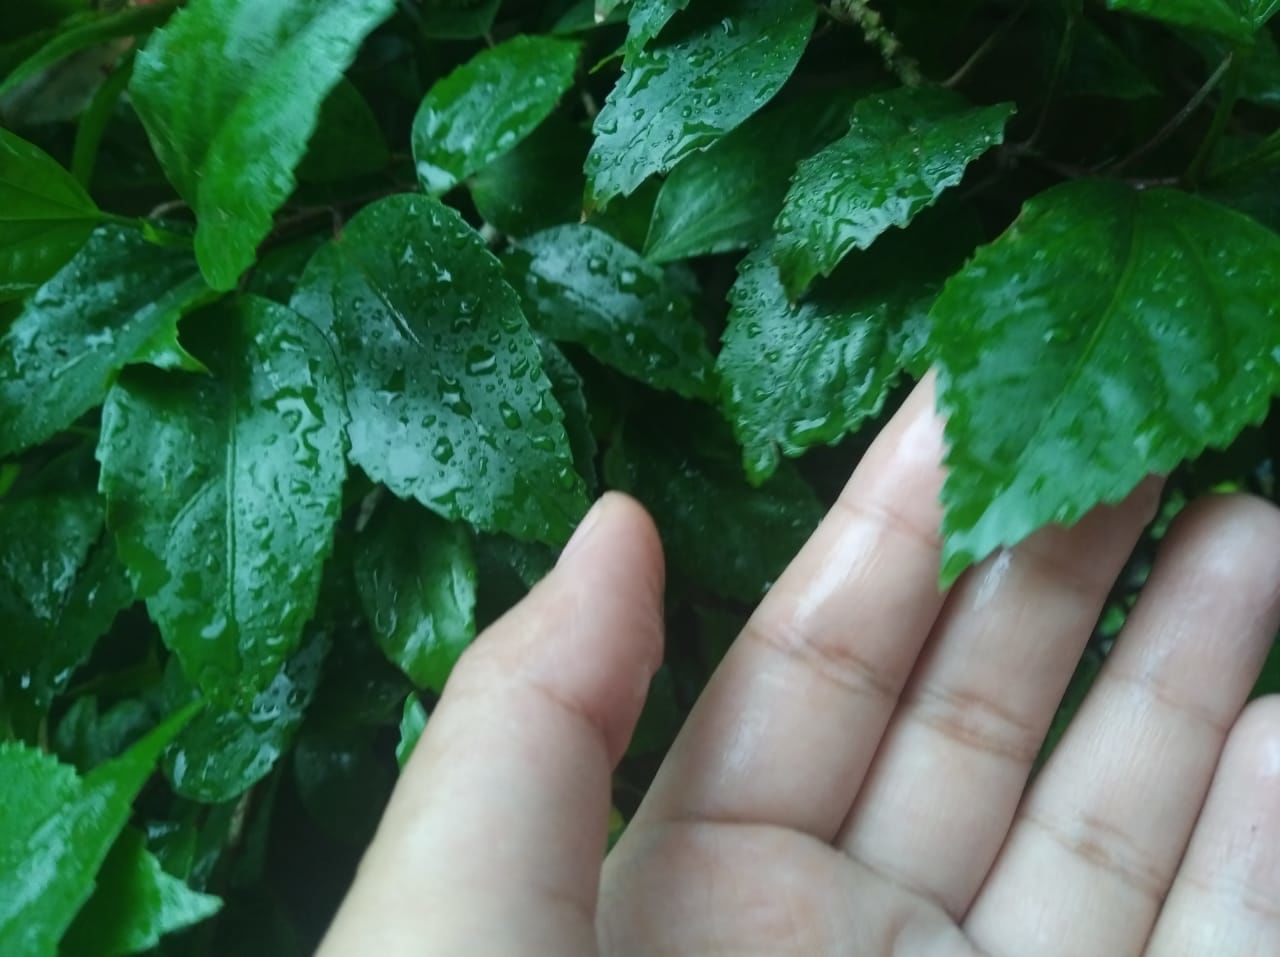 CLOSE-UP OF HAND ON LEAVES